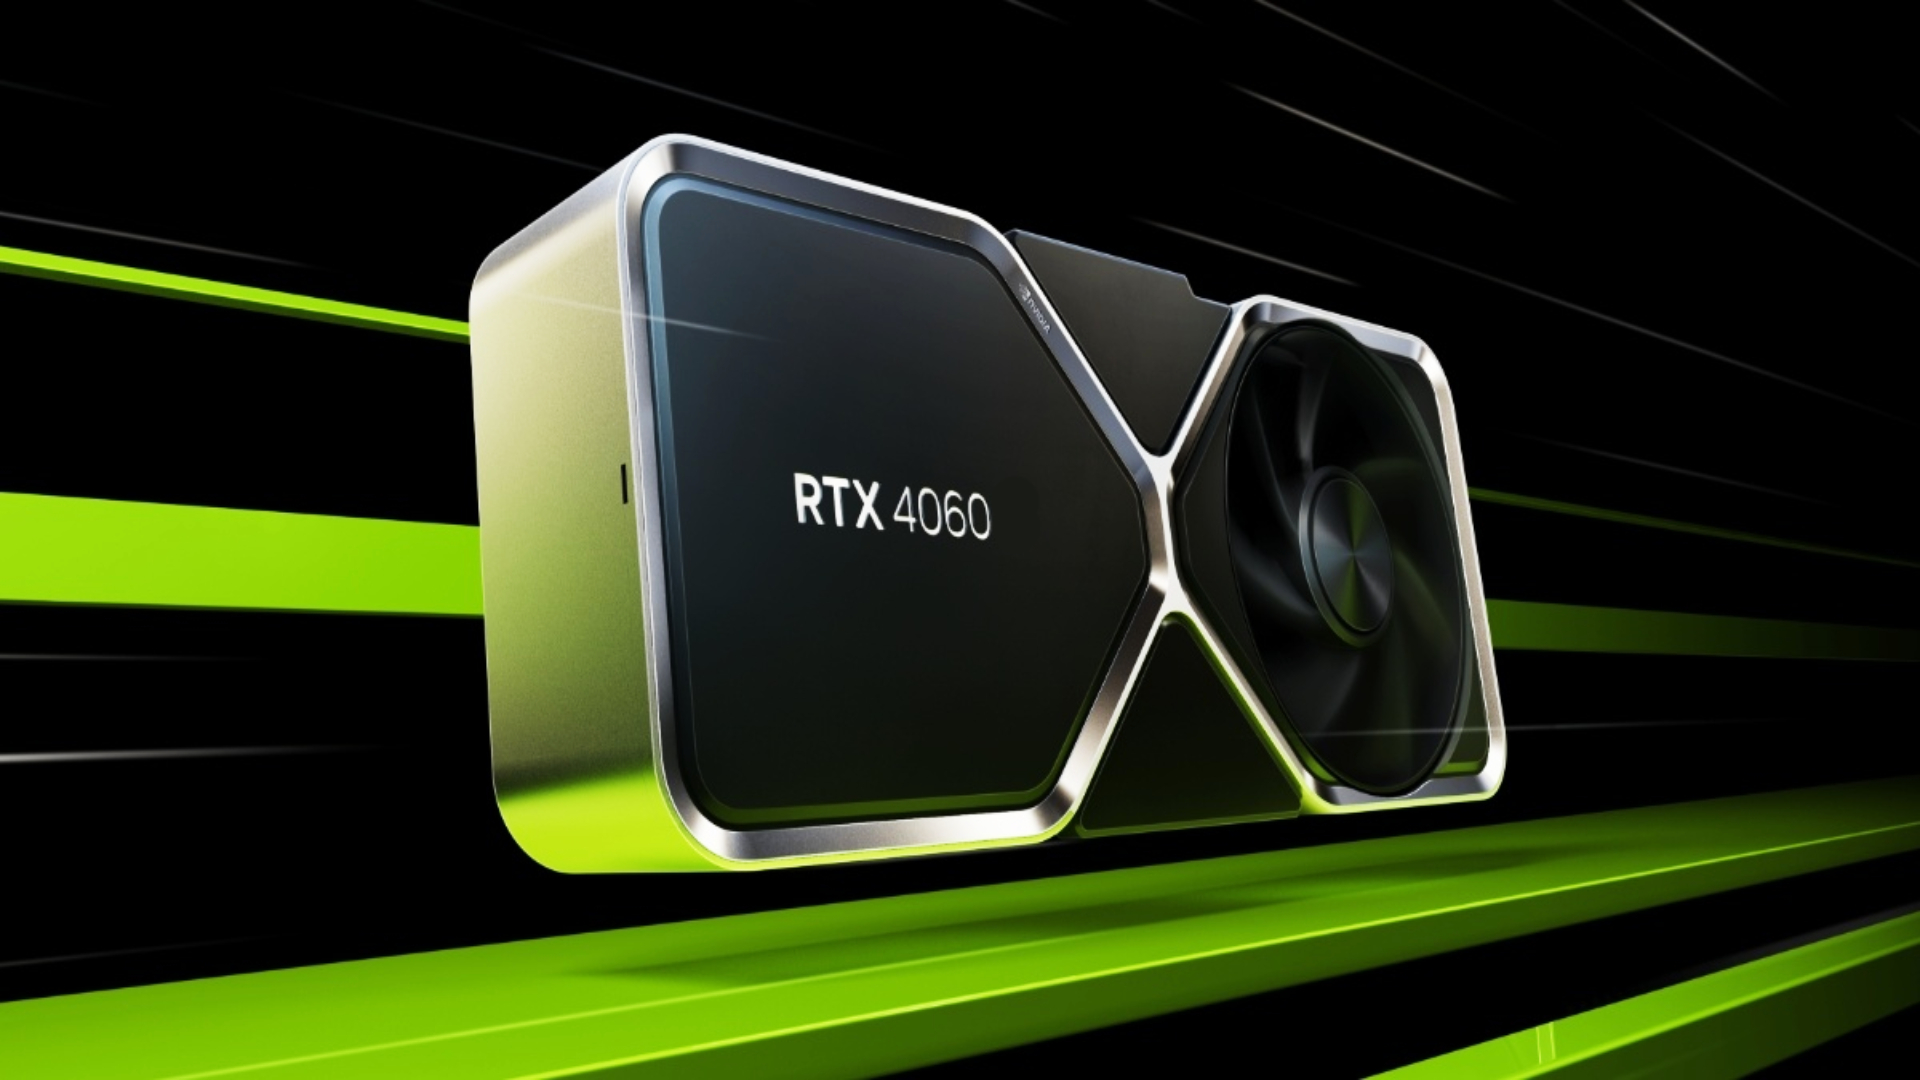 The Nvidia GeForce RTX 4060 launch is much closer than we thought